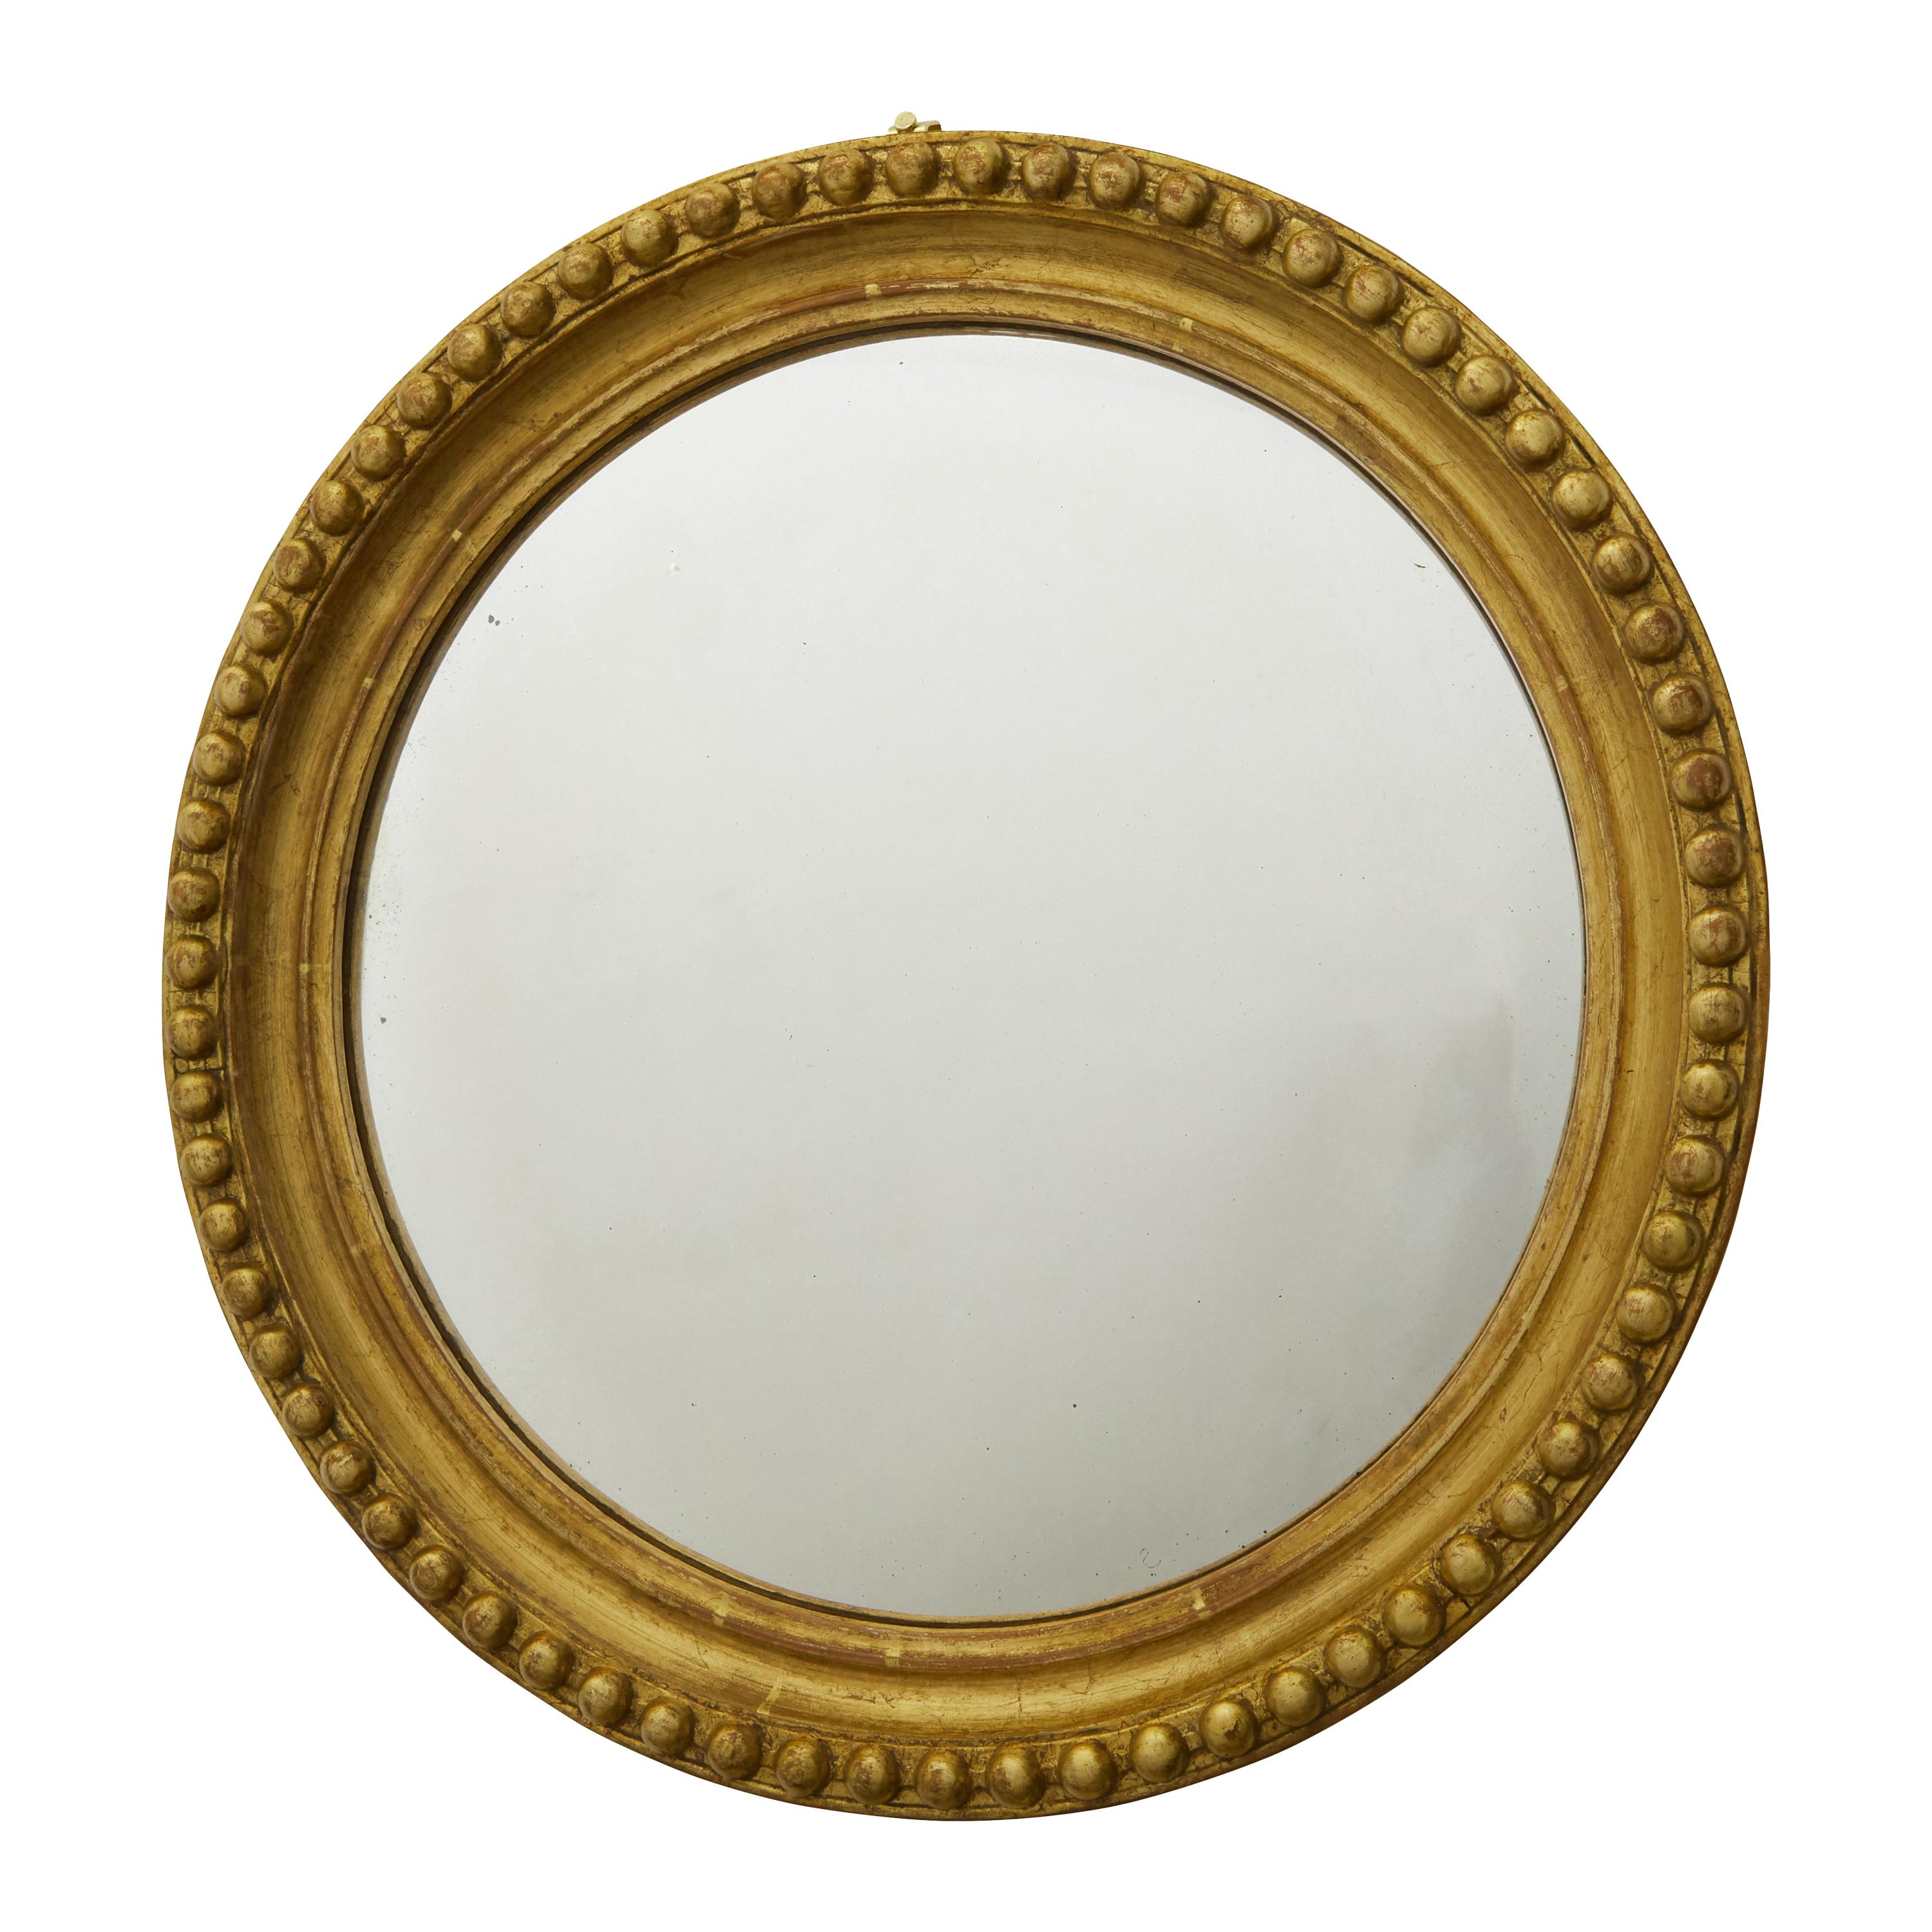 Vintage English Midcentury Giltwood Convex Mirror with Beaded Motifs